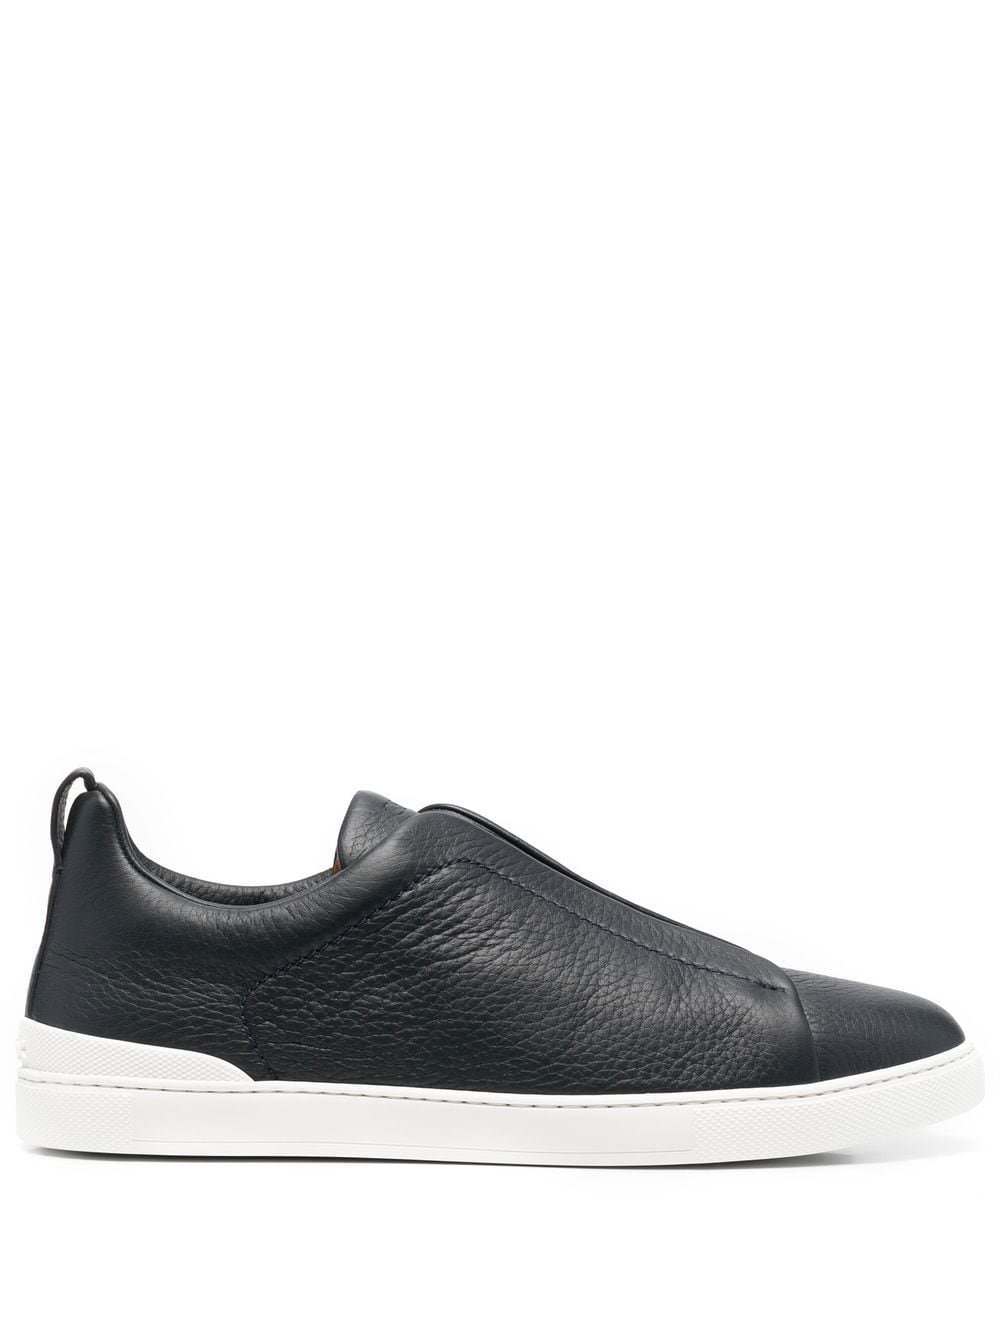 Image 1 of Zegna slip-on leather sneakers